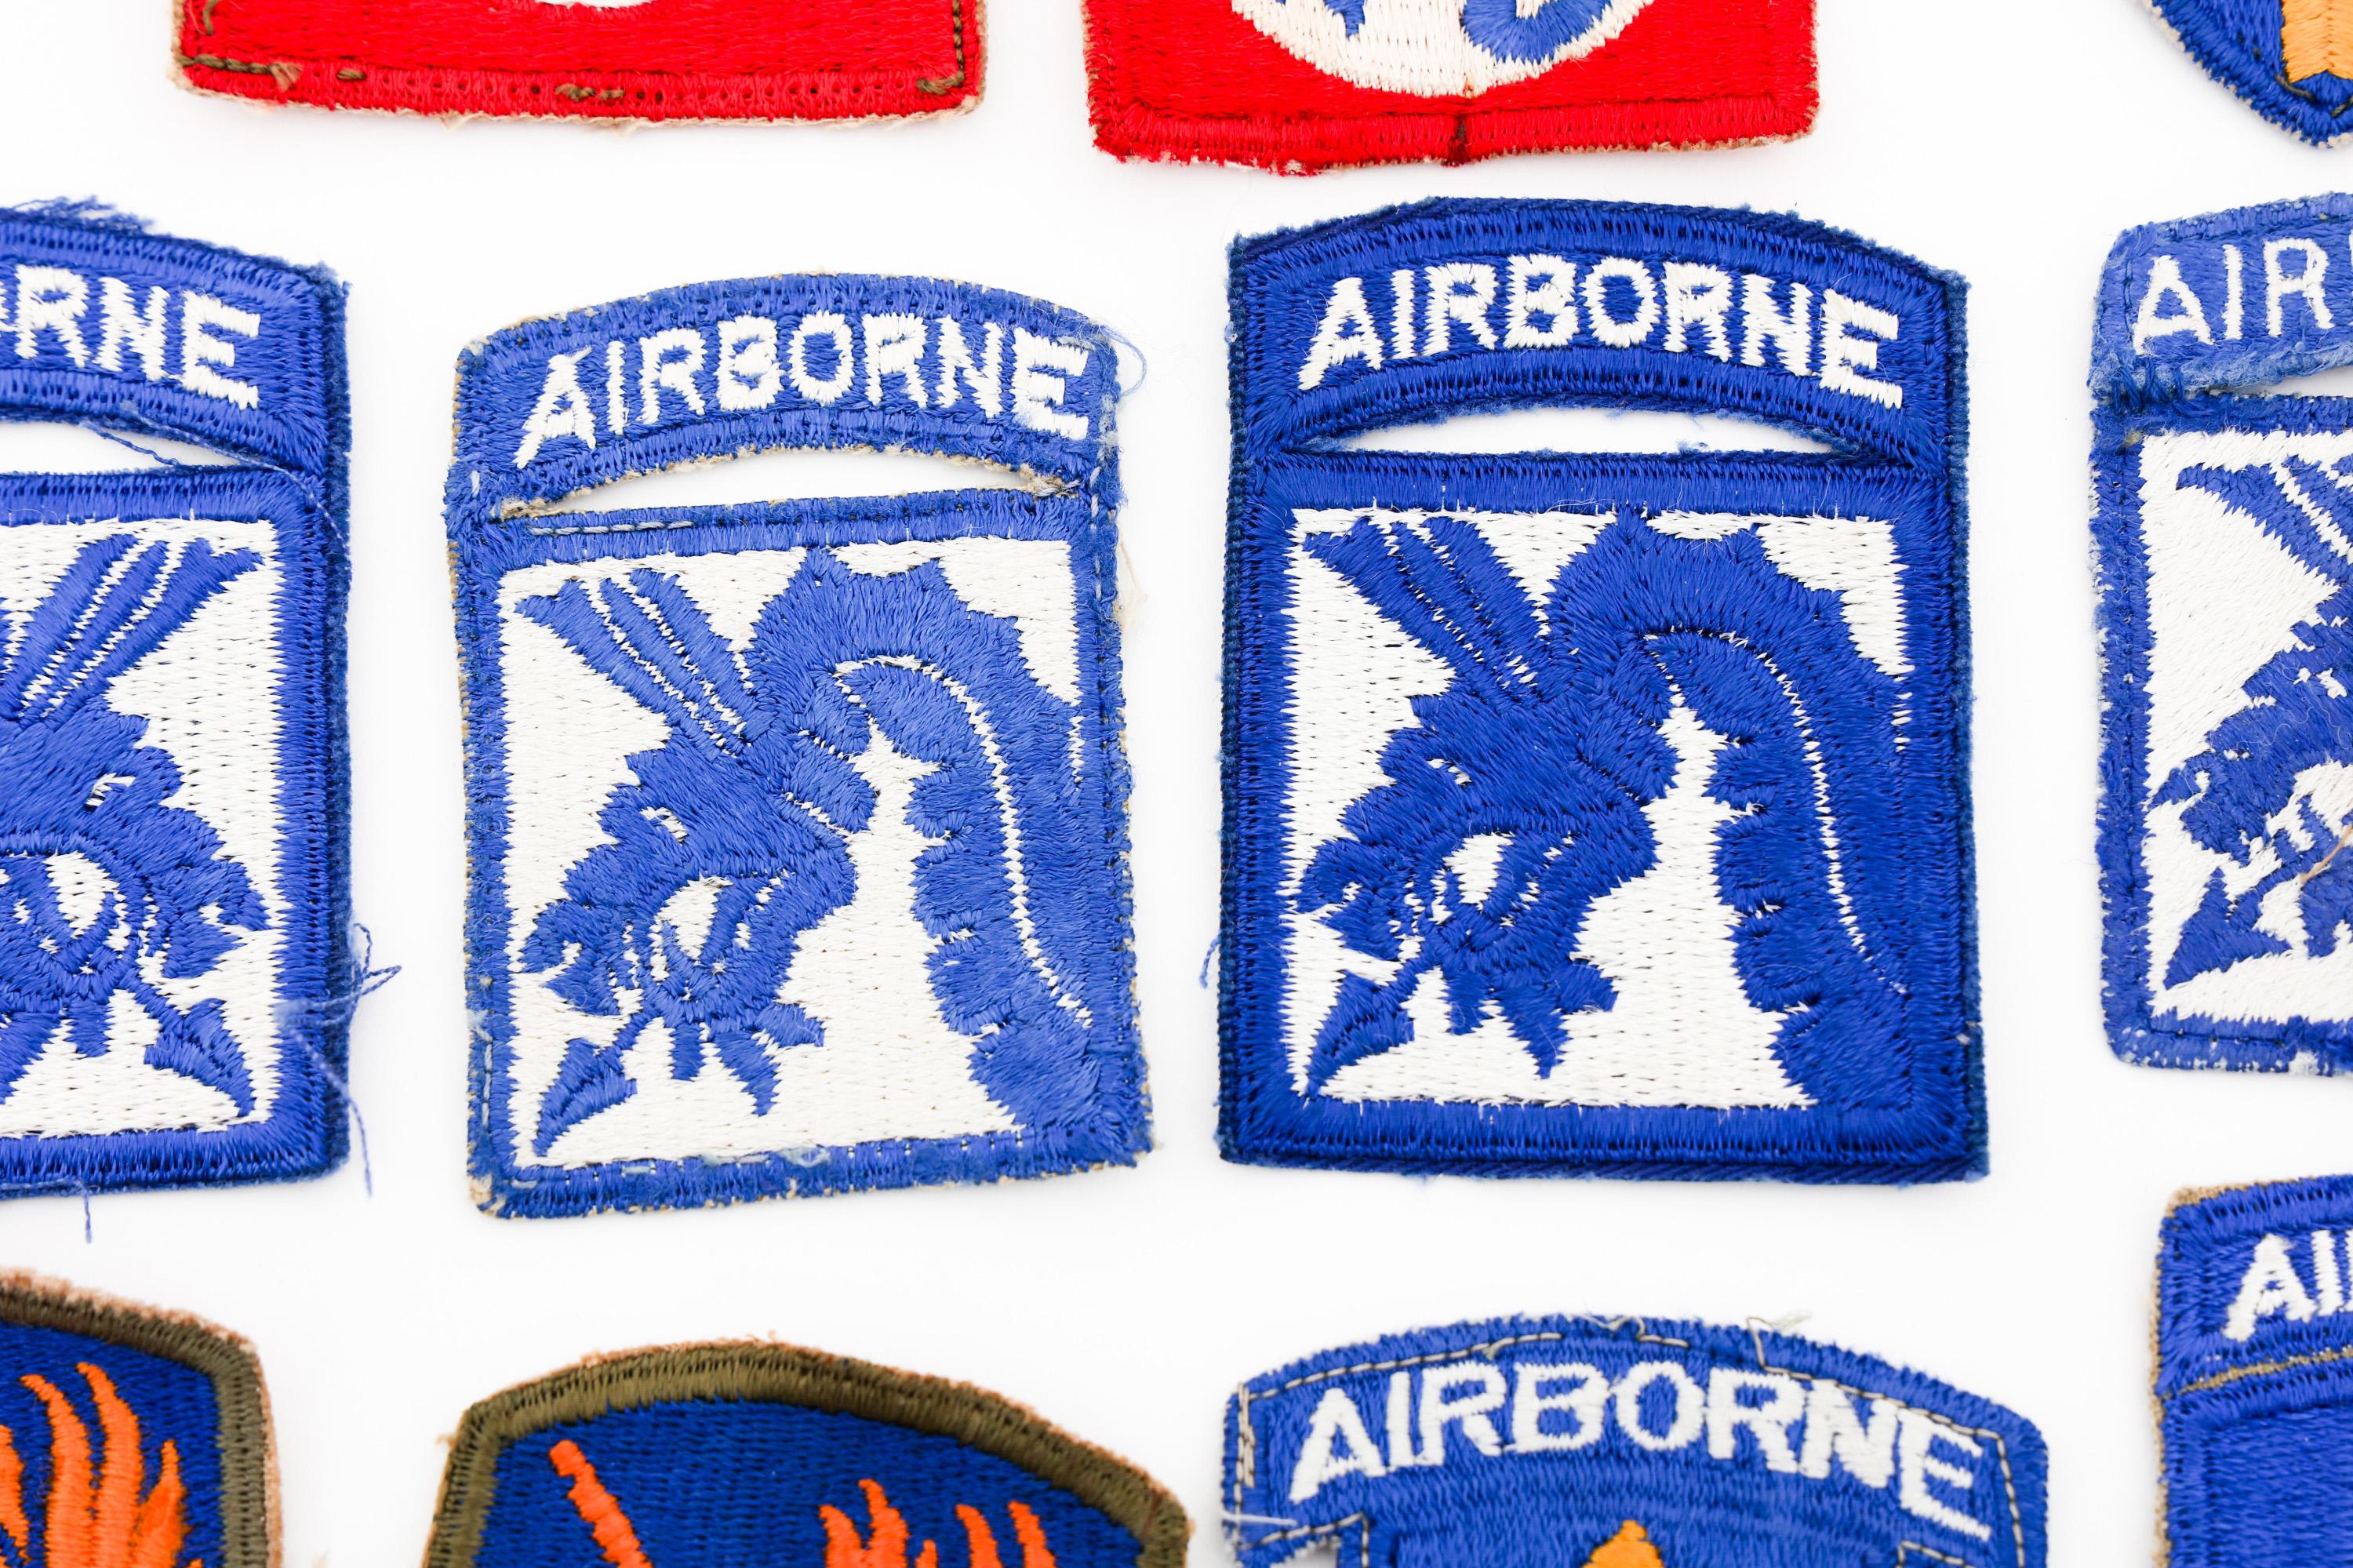 WWII - COLD WAR US ARMY AIRBORNE SHOULDER PATCHES